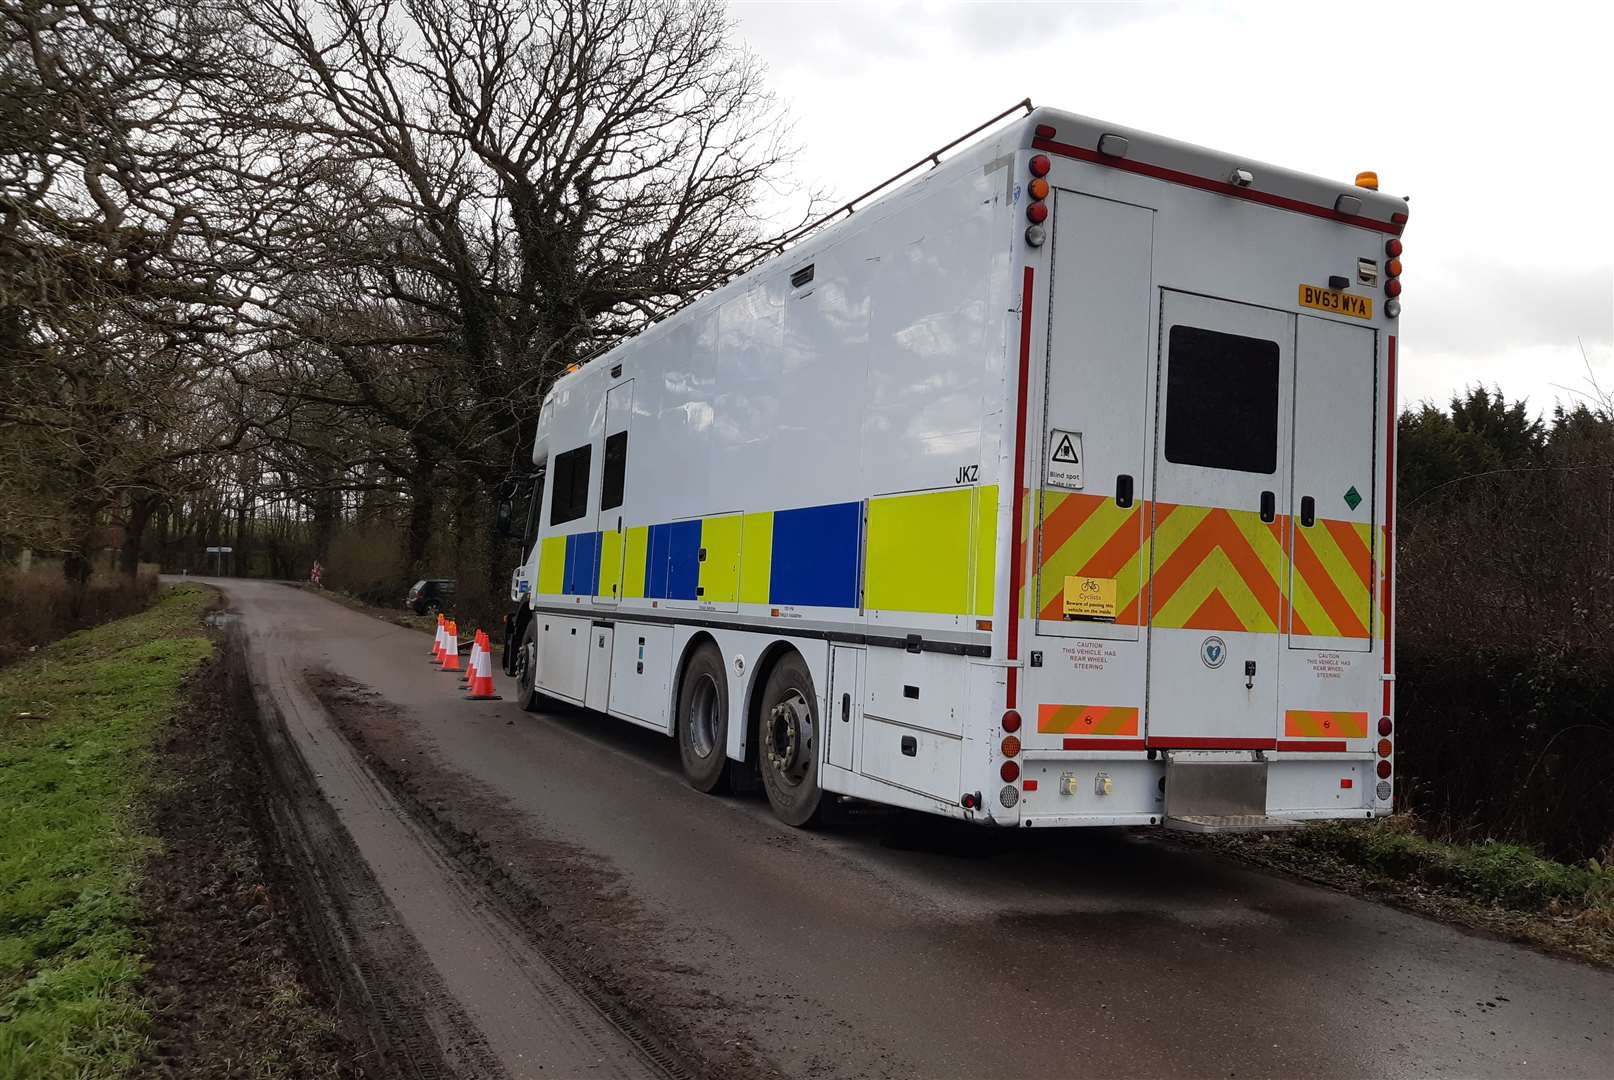 A diving team truck arrived in Bears Lane on Thursday and is still in place